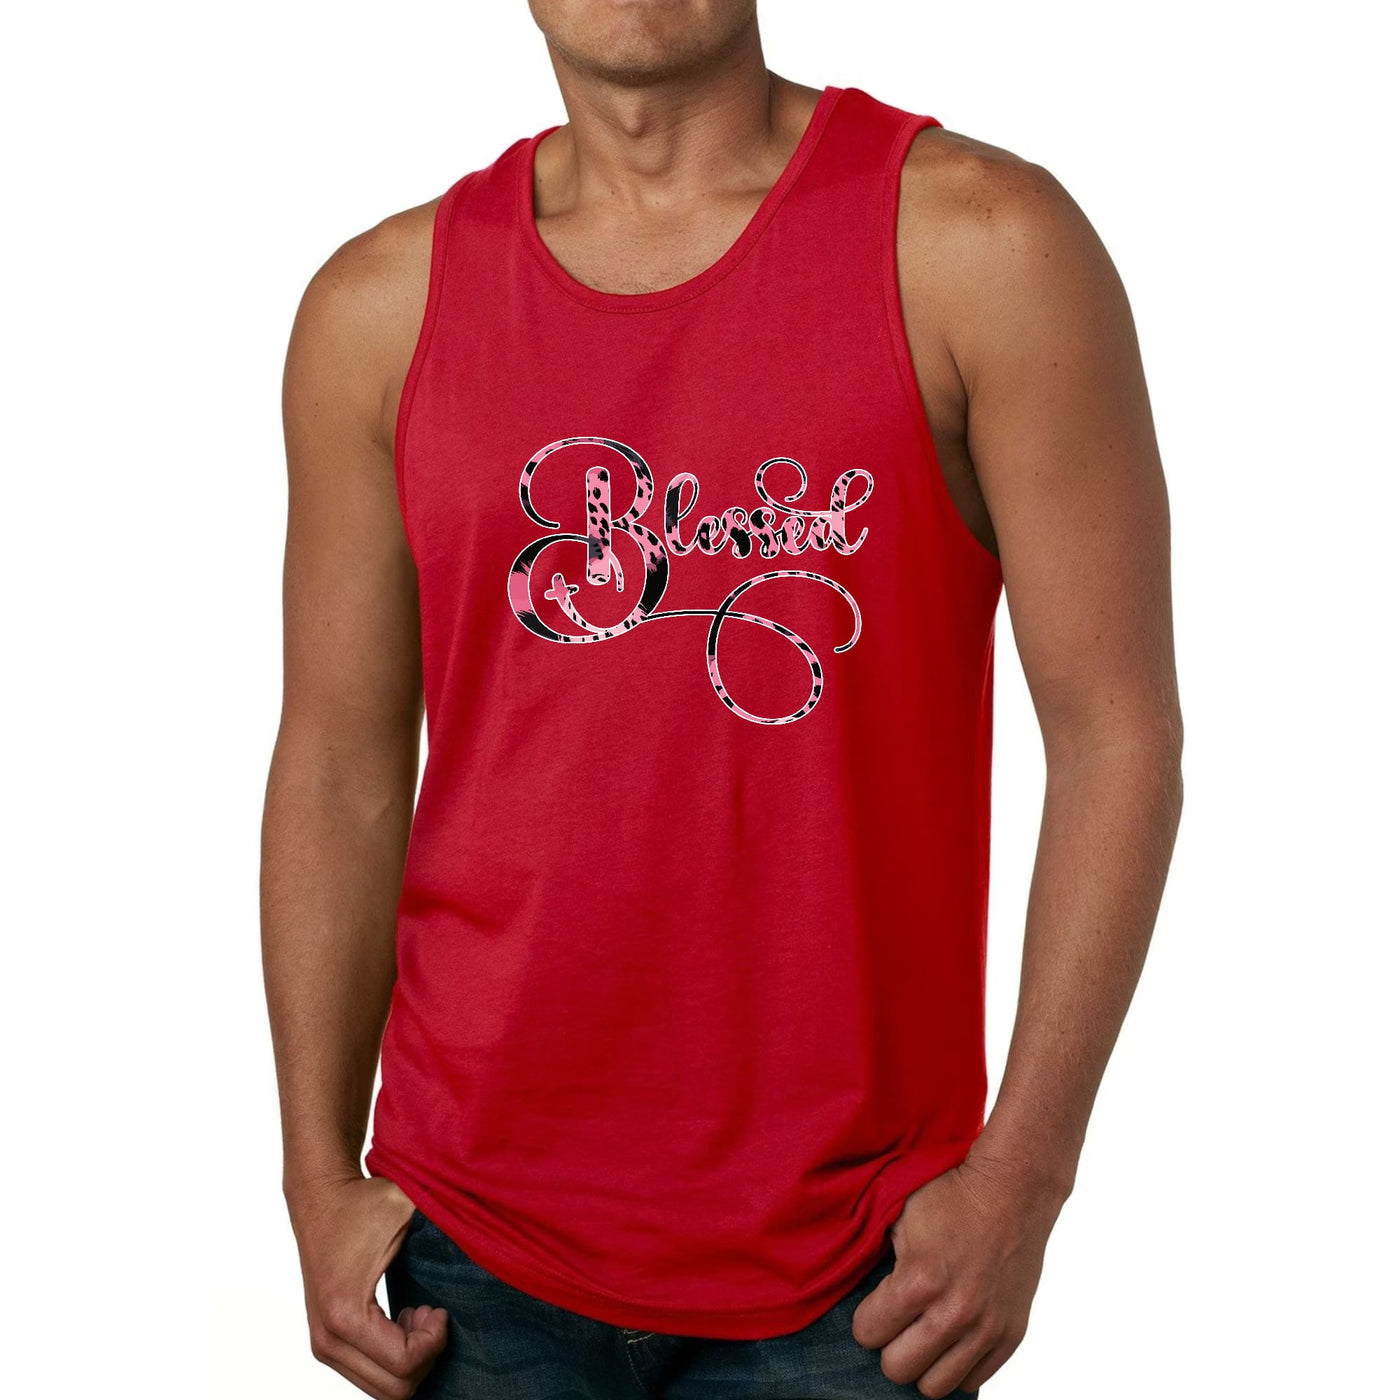 Mens Tank Top Fitness Shirt Blessed Pink And Black Patterned Graphic - Mens